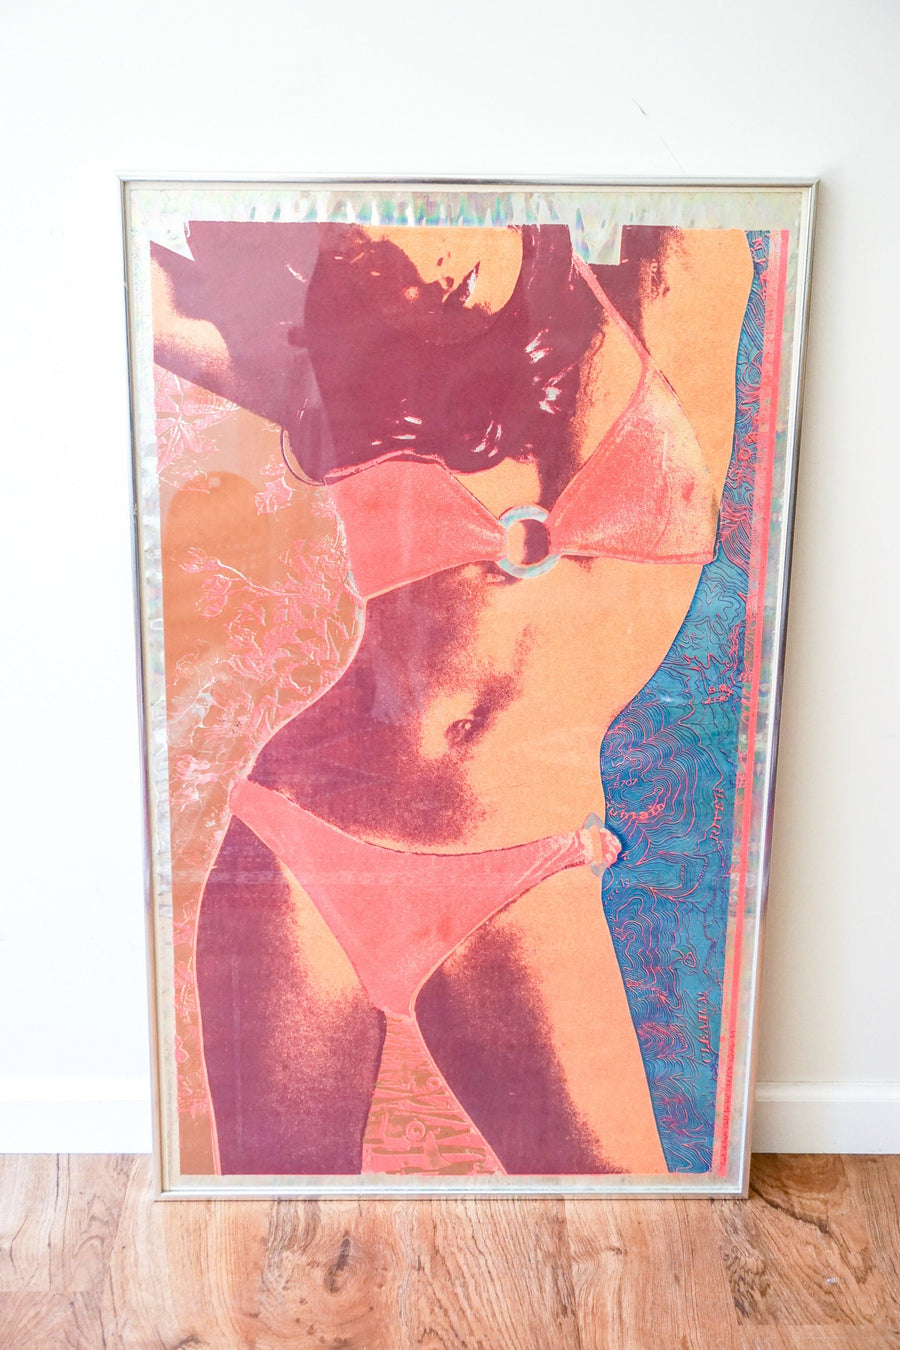 1969 Rock of Ages Cleft for Me Bikini Girl Print Serigraph 32/50 Signed By Artist Willian Weegee